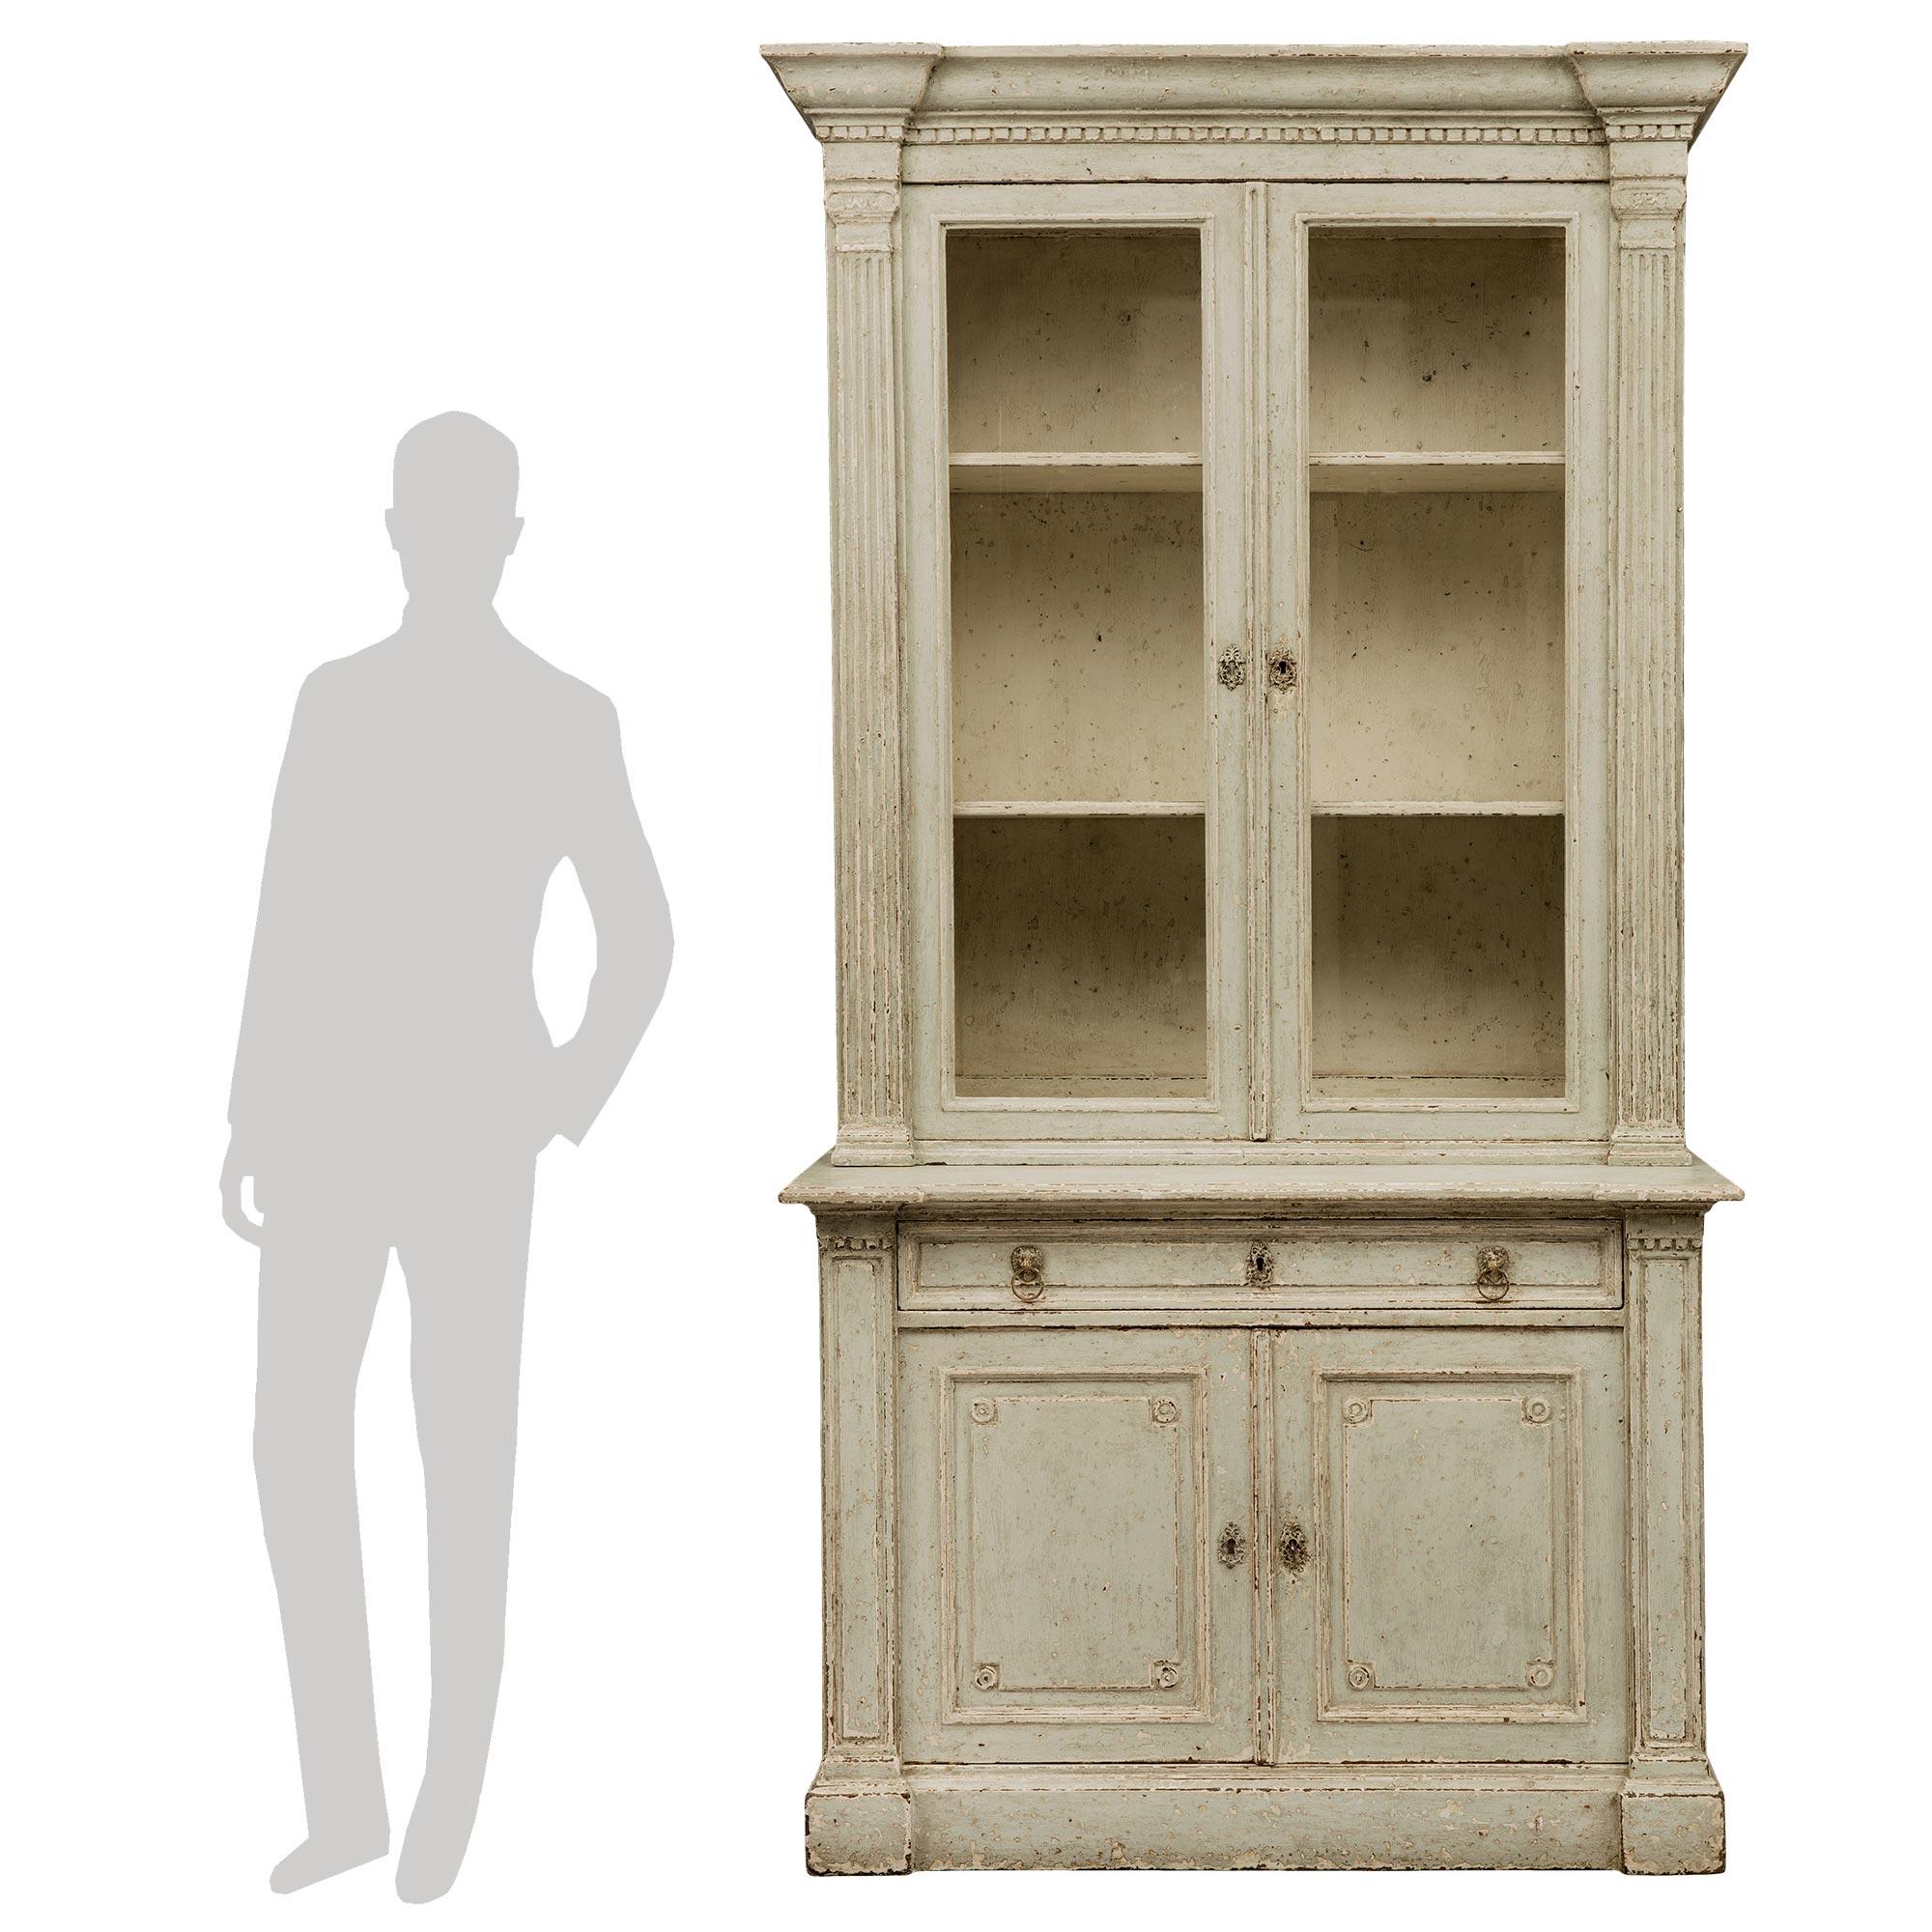 A most elegant French 19th century Louis XVI st. patinated deux corps cabinet vitrine. The vitrine is raised by a straight base with a mottled design and elegant side vertical columns with dentil molding at the top. Above is a single drawer